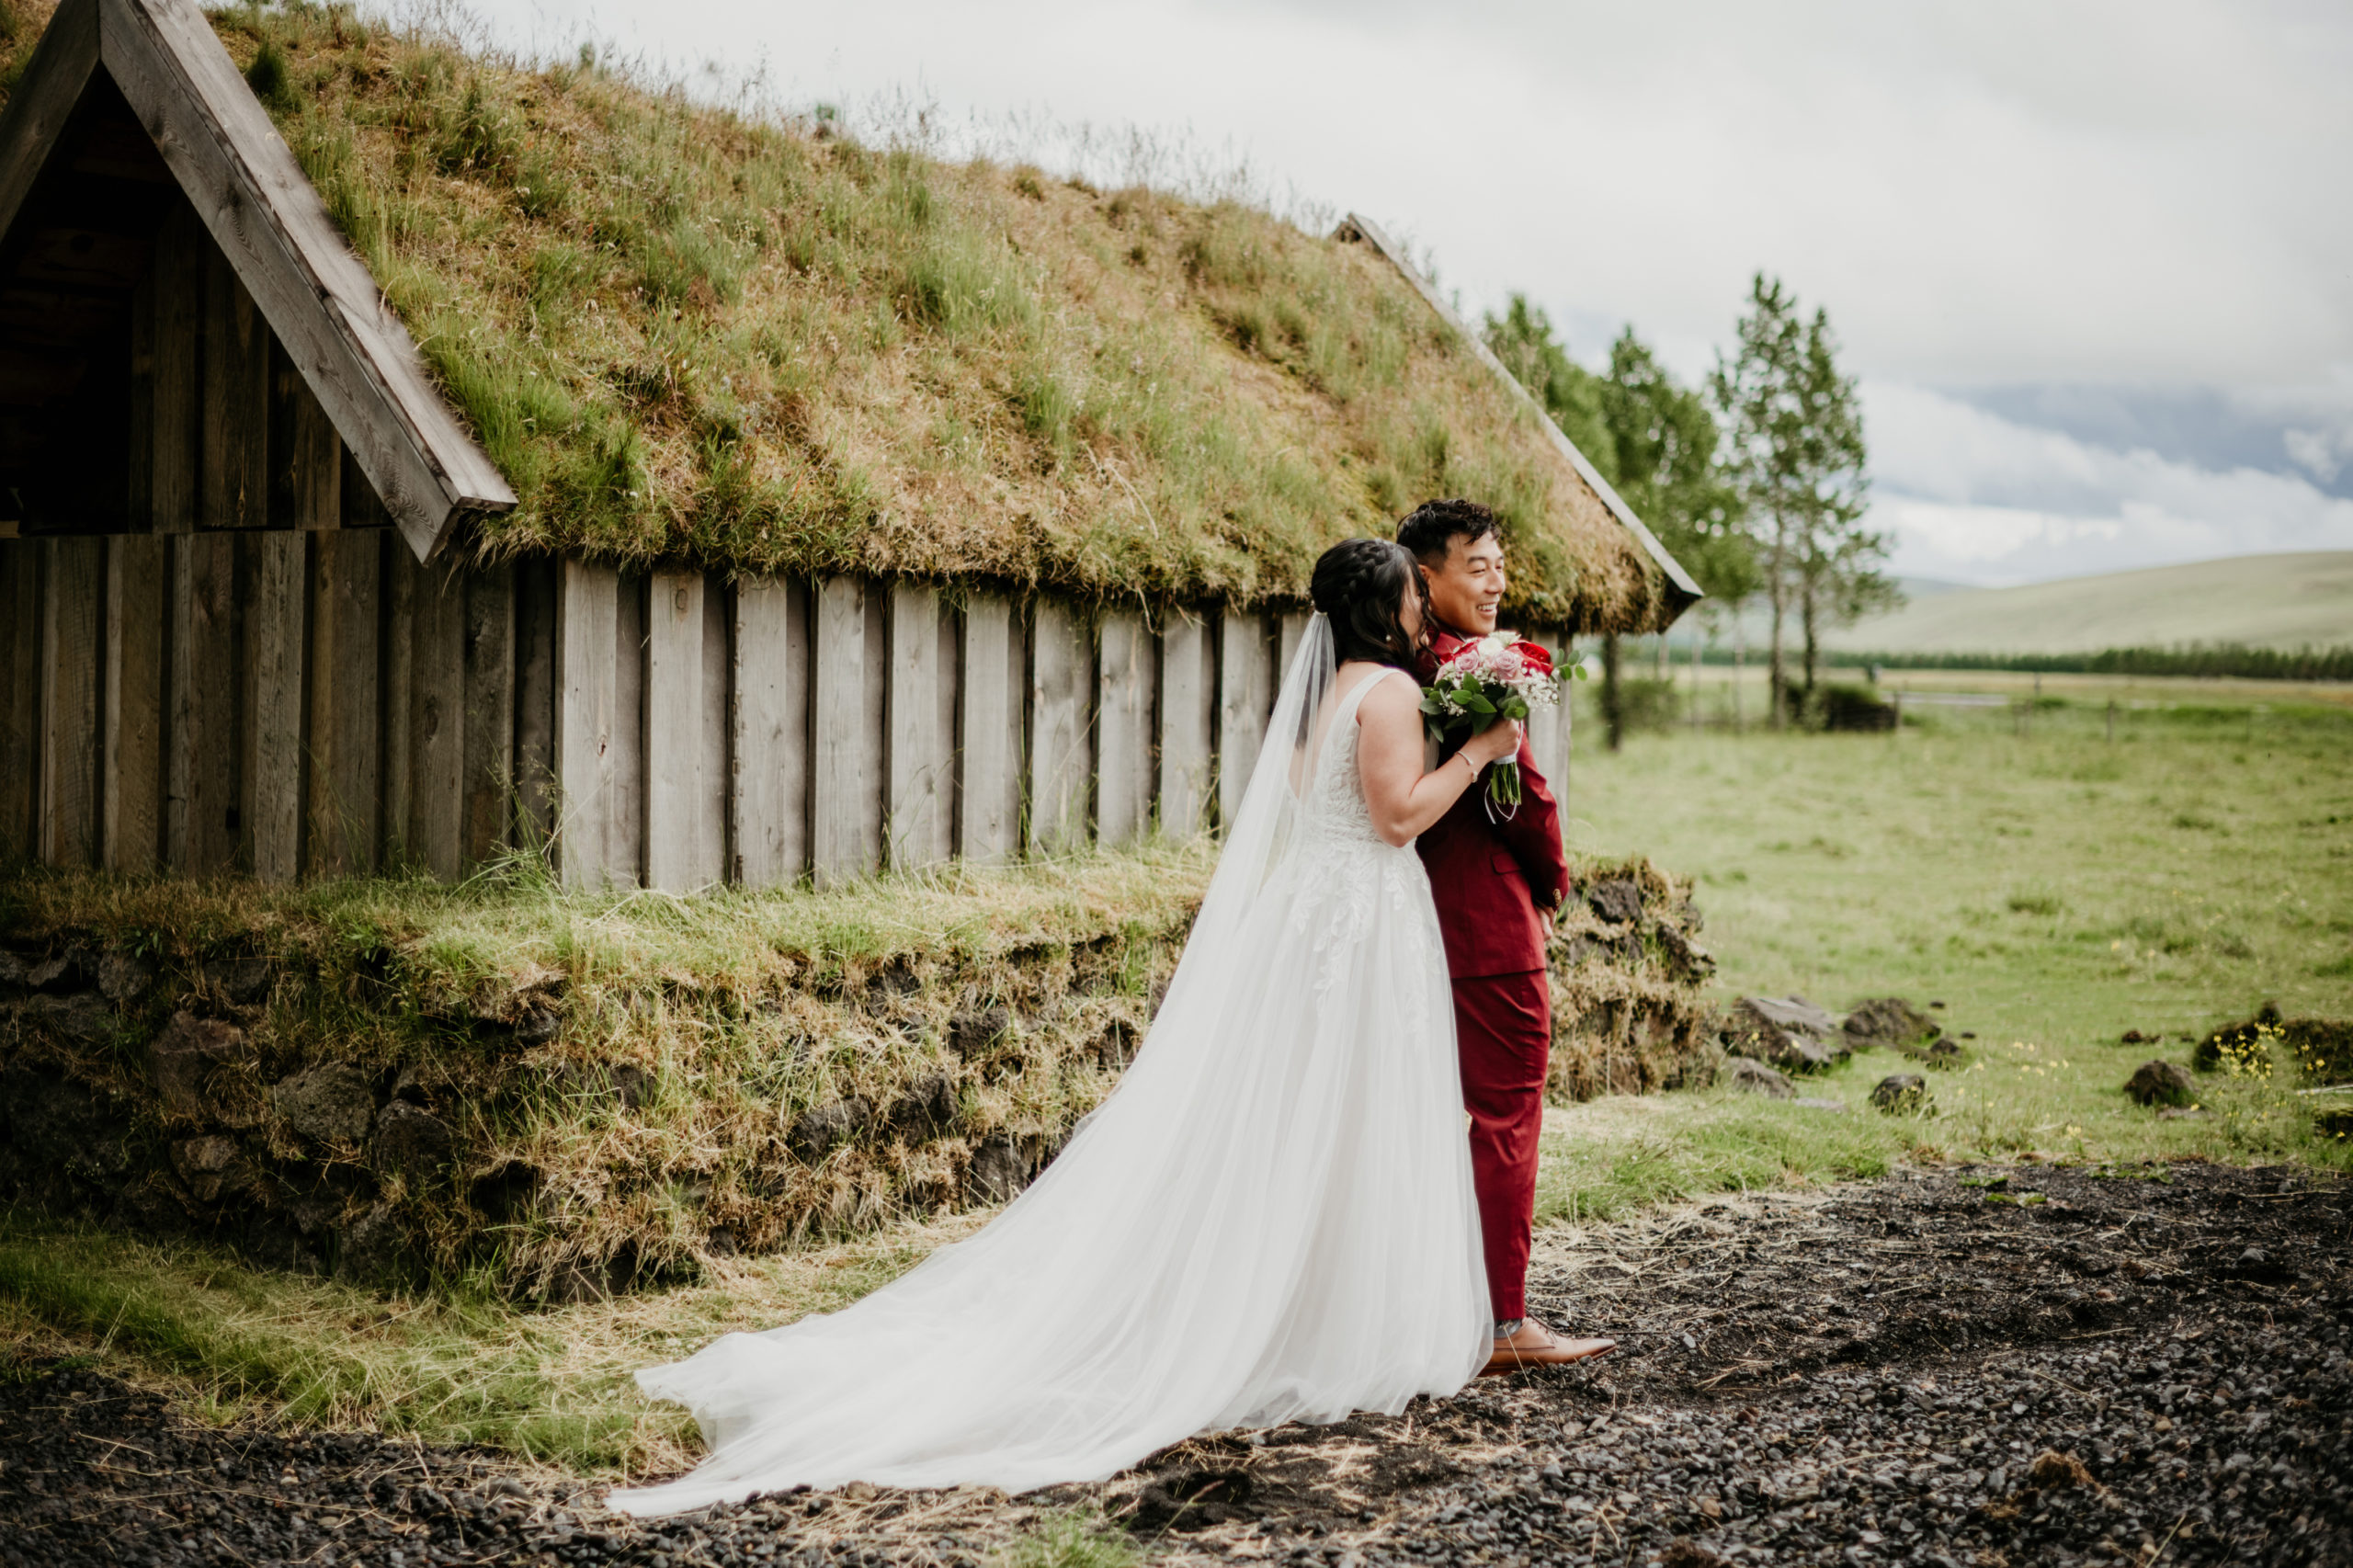 First look elopement photos with Icelandic horses! 

Iceland elopement at Reynisfjara! Iceland is a one of a kind and adventurous elopement location and MUST be explored! If you're wondering how to elope in Iceland, see how these two did it! 